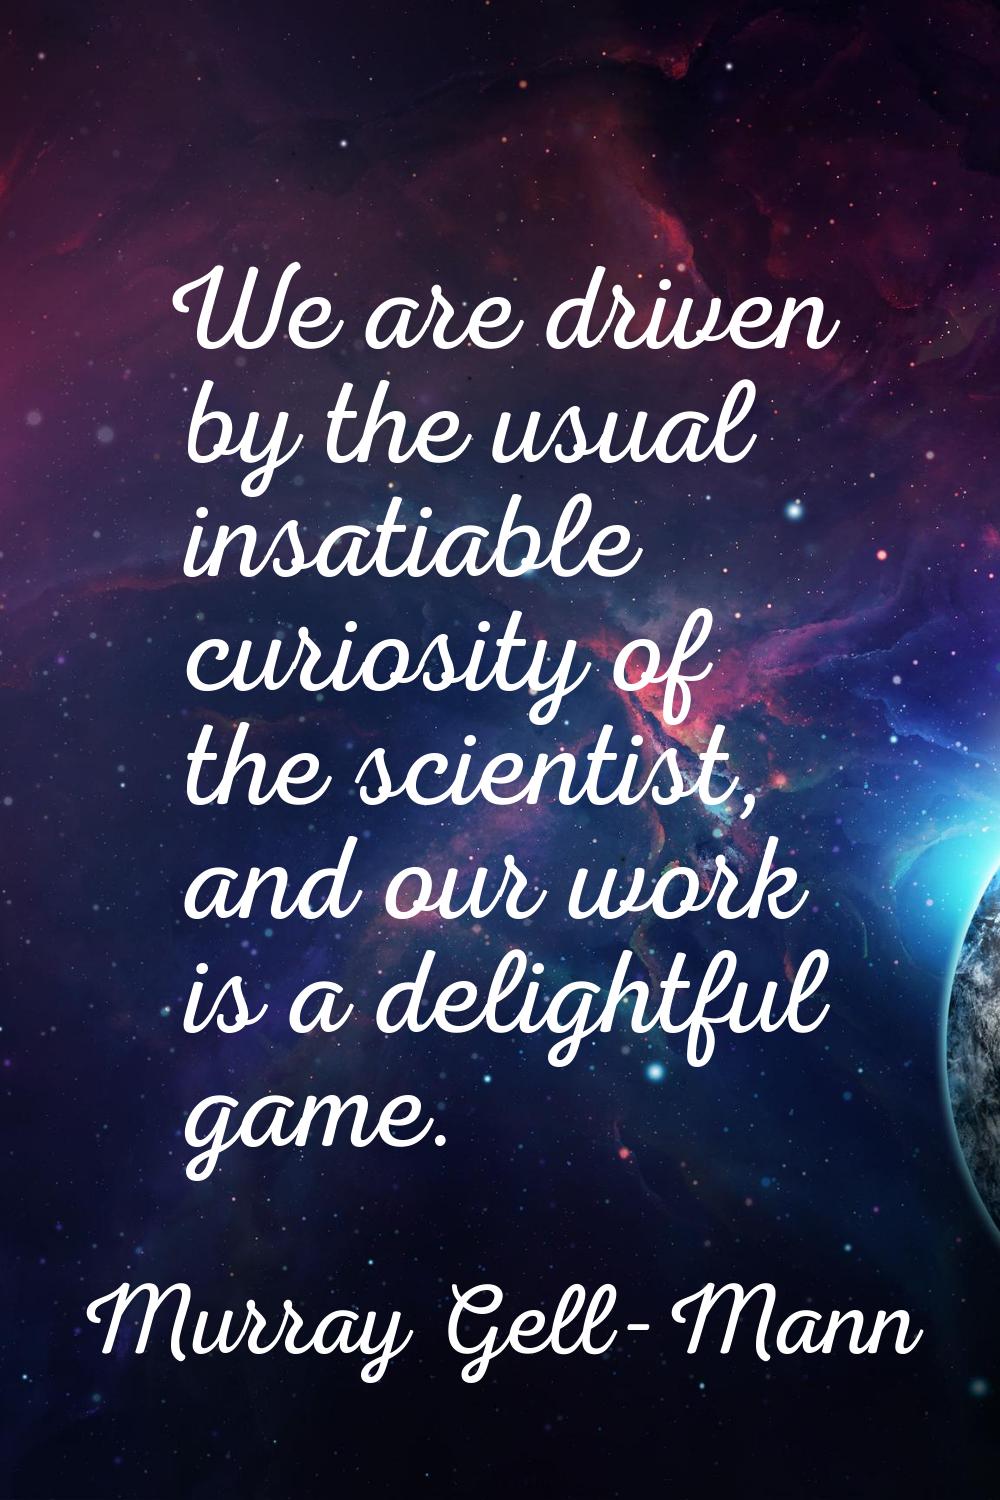 We are driven by the usual insatiable curiosity of the scientist, and our work is a delightful game